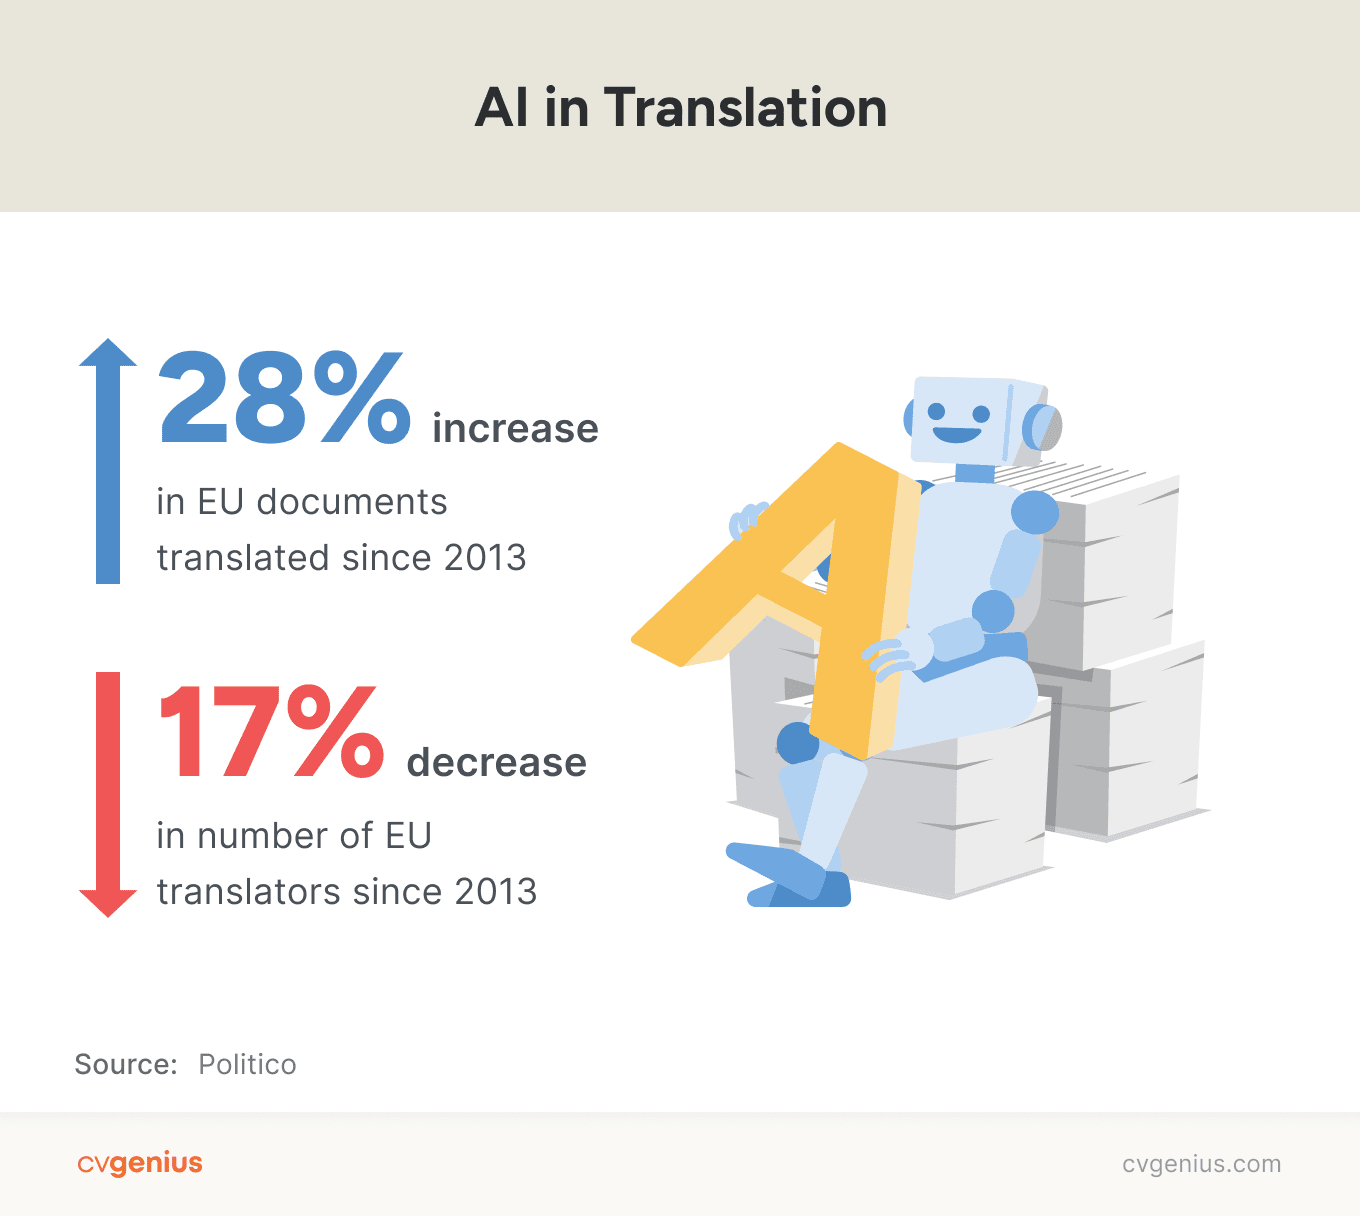 Bar graphs and illustrations of documents and people show how AI will replace jobs in the translation industry.